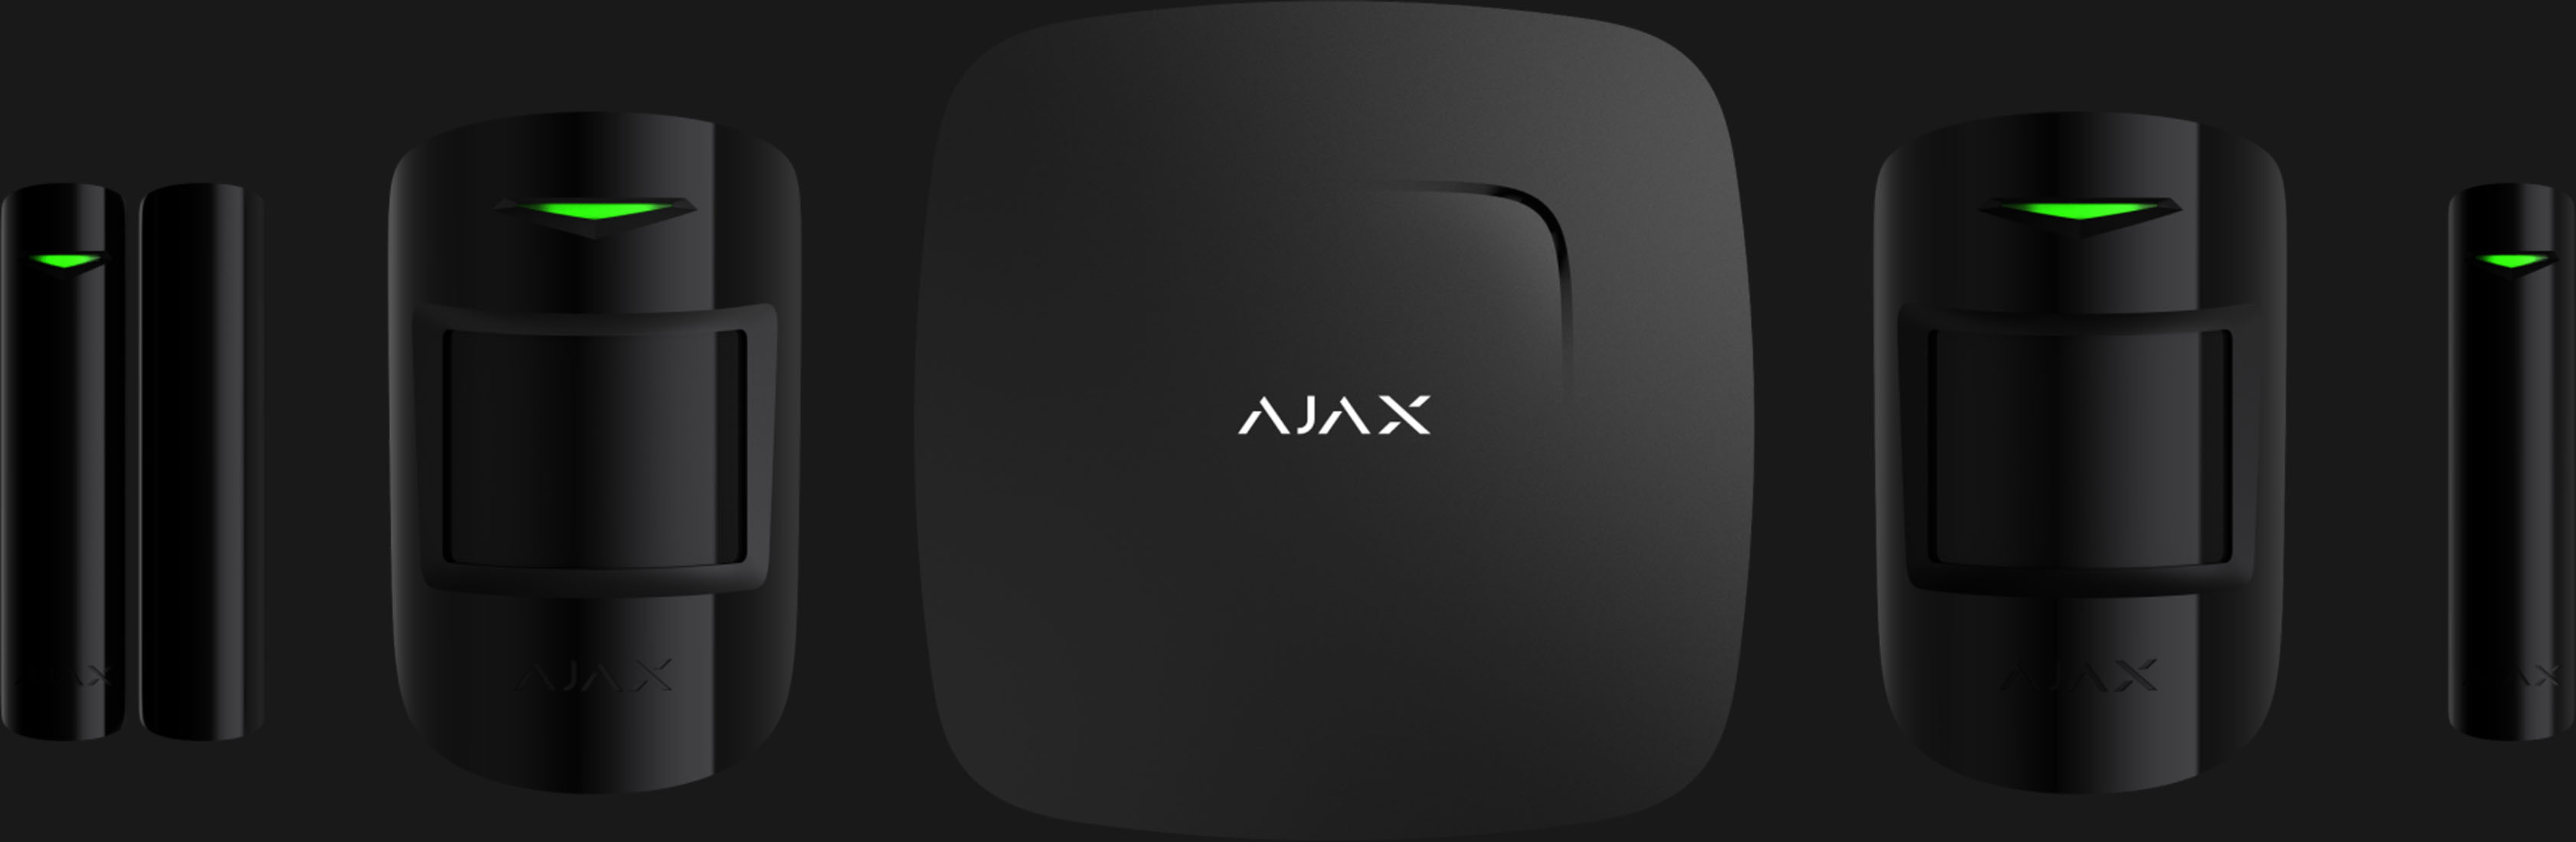 Ajax Systems - Ajax. The new generation of wireless security systems